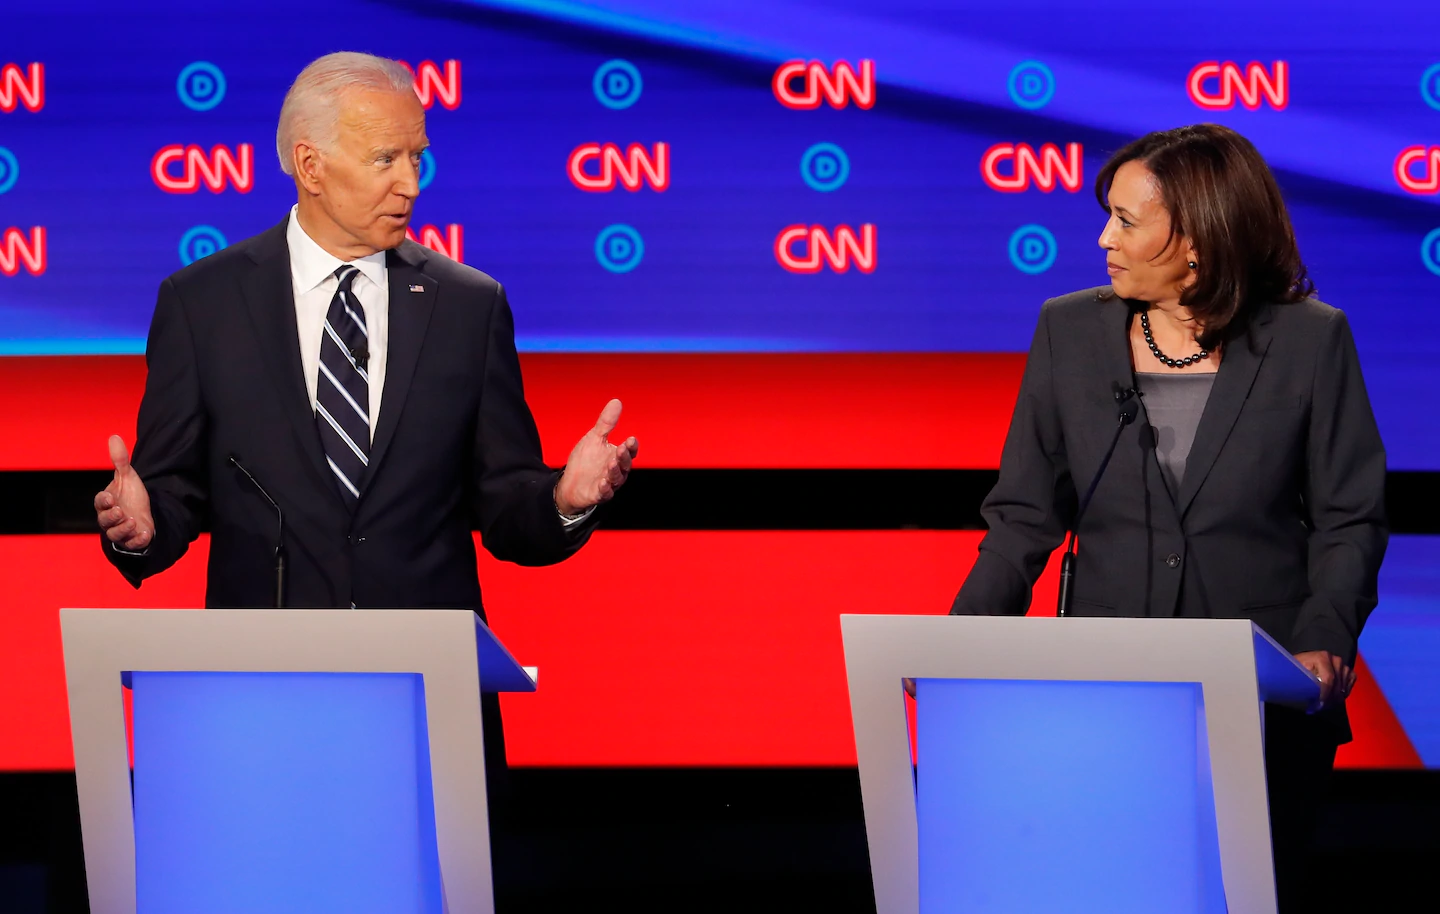 Joe Biden wants to be ‘simpatico’ with his running mate. Some fear that rules out most black women.